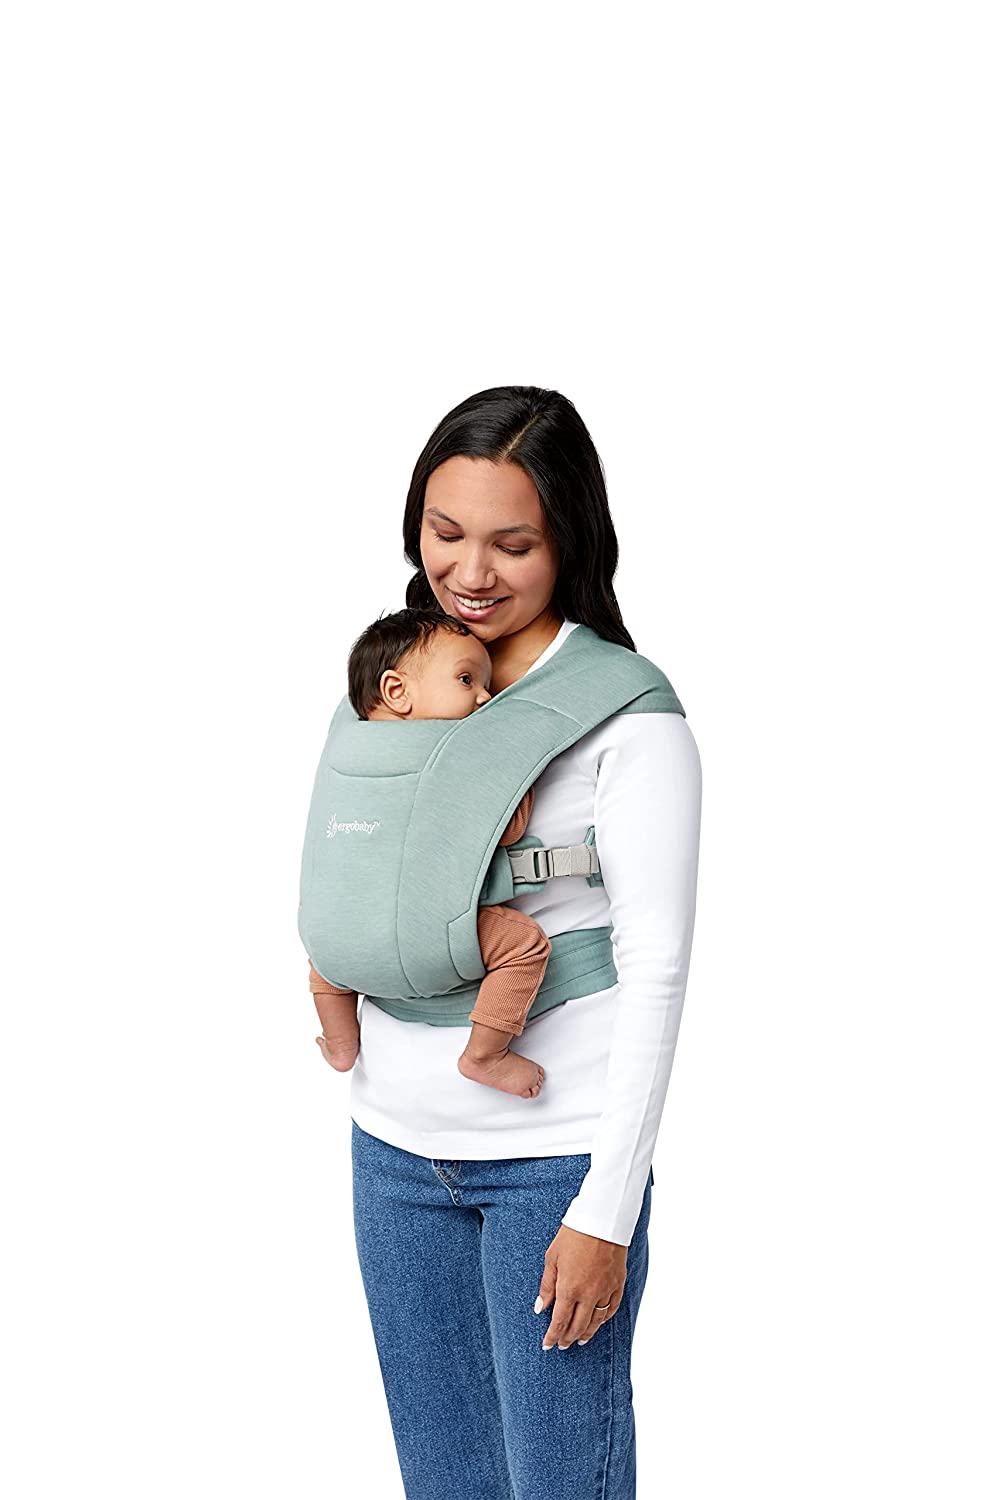 Ergobaby baby carrier for newborns from birth extra soft, Embrace baby carrier baby carrier bag ergonomic (Pure Black)